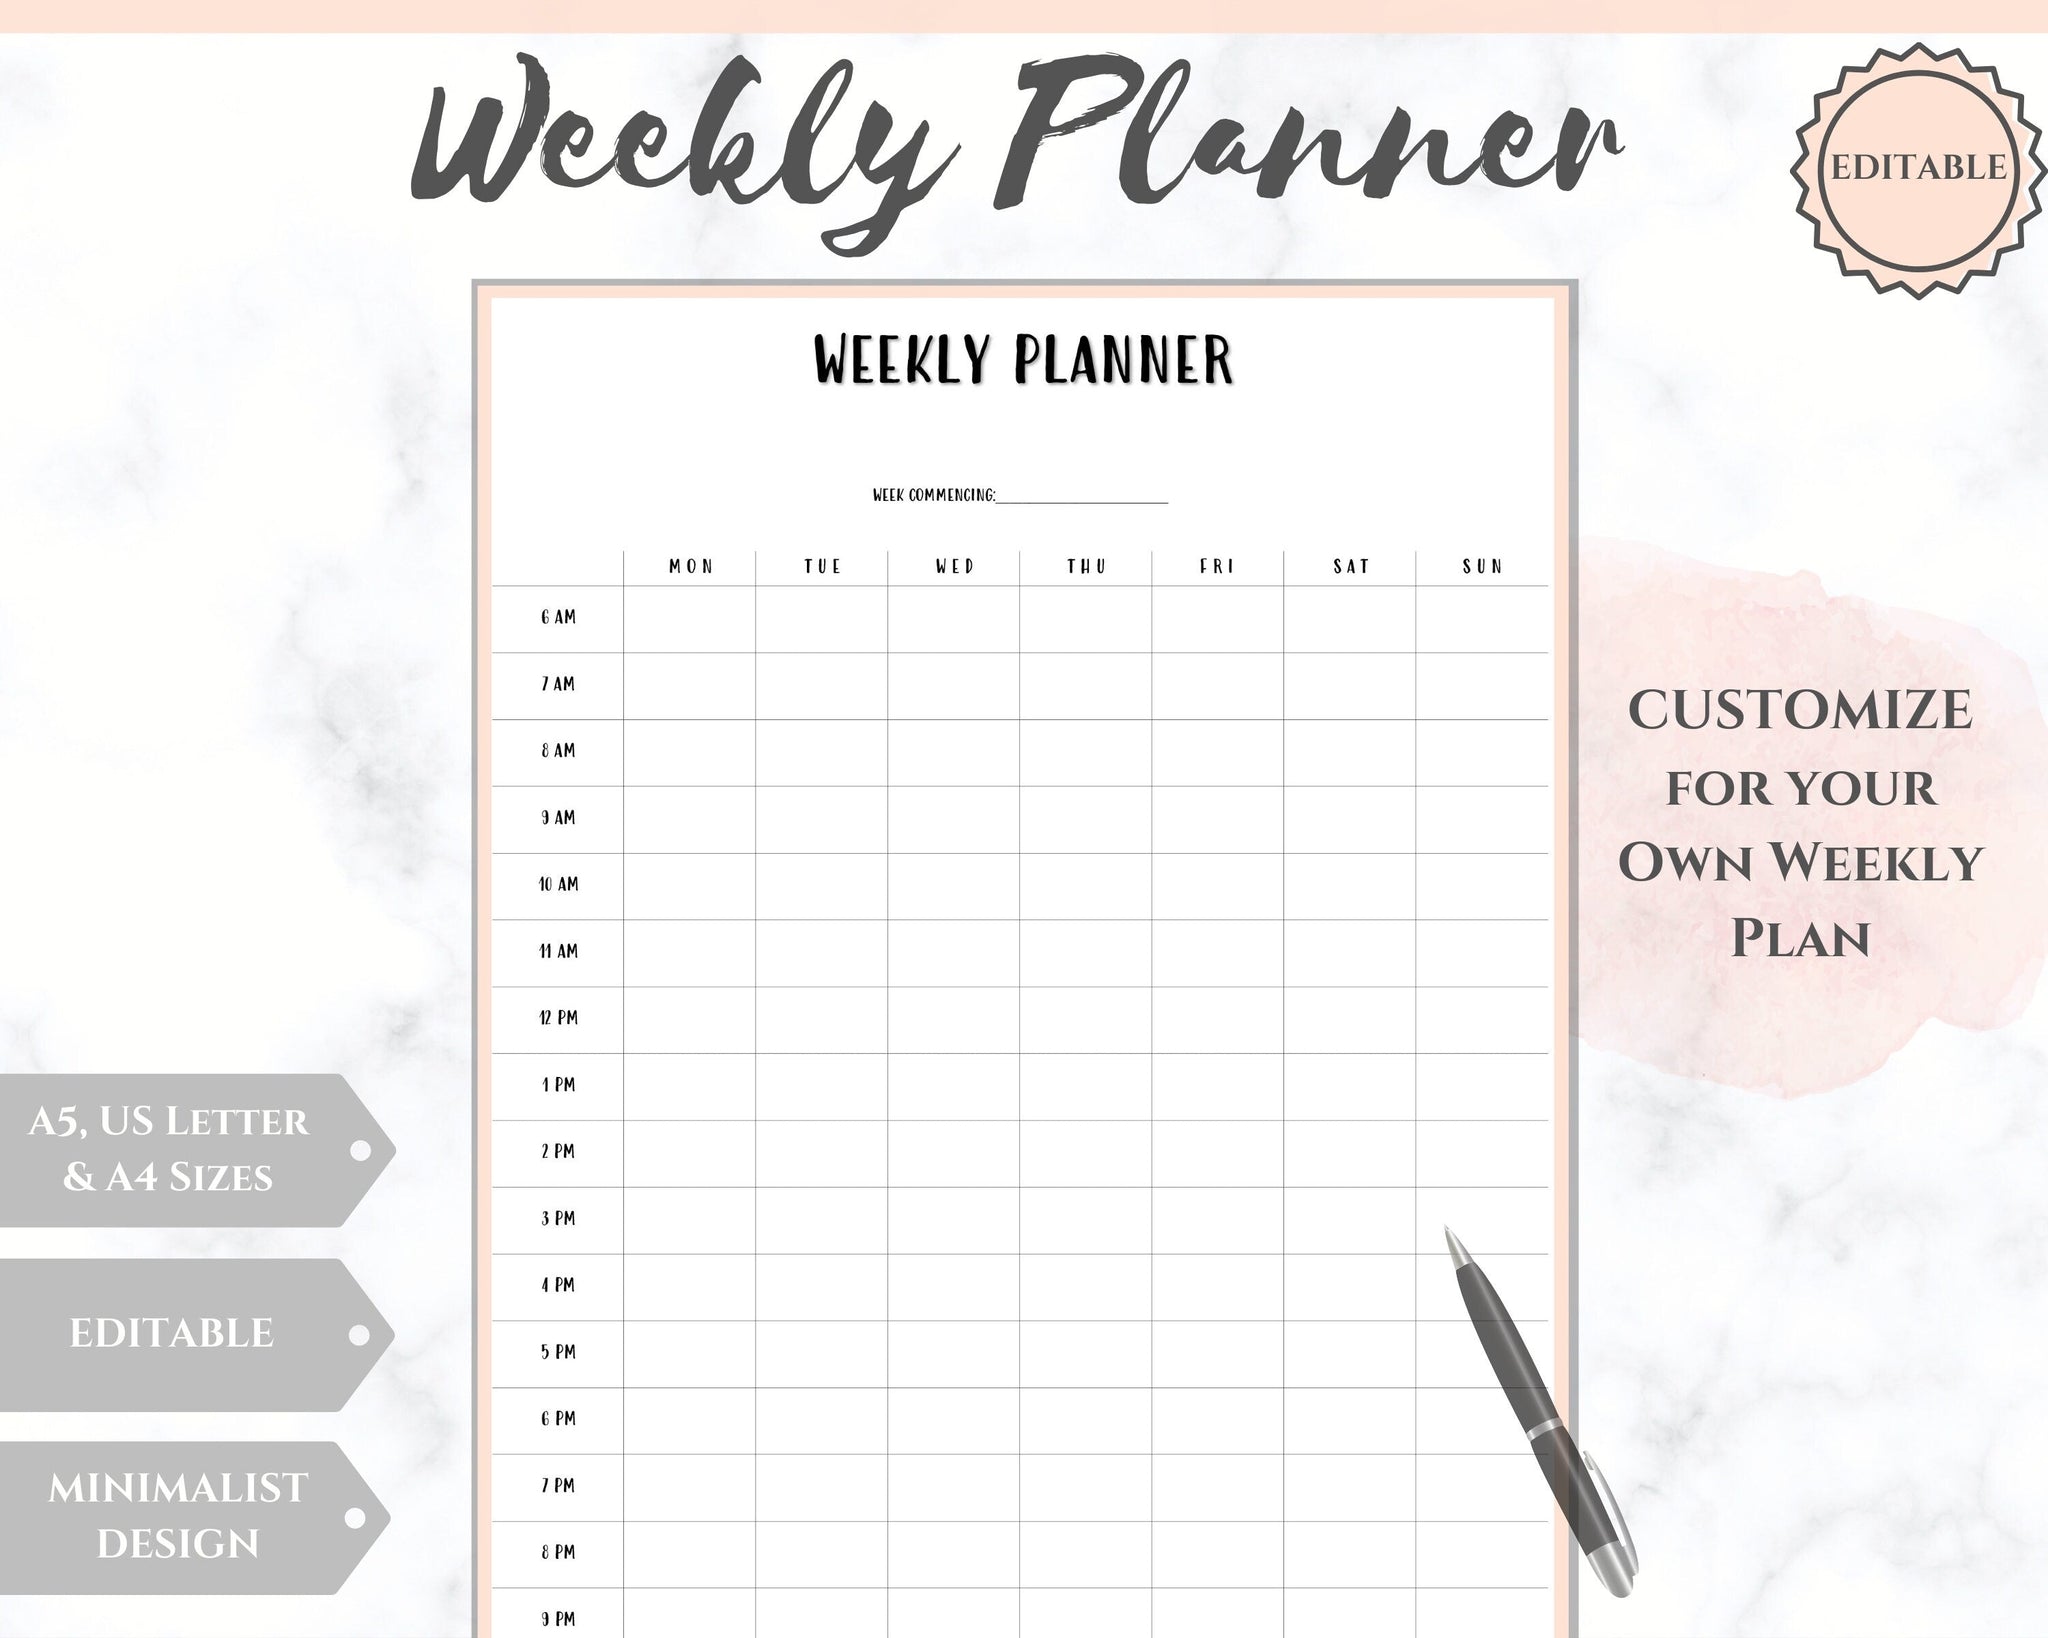 Hourly/Daily Planner Inserts for A5 Planners 